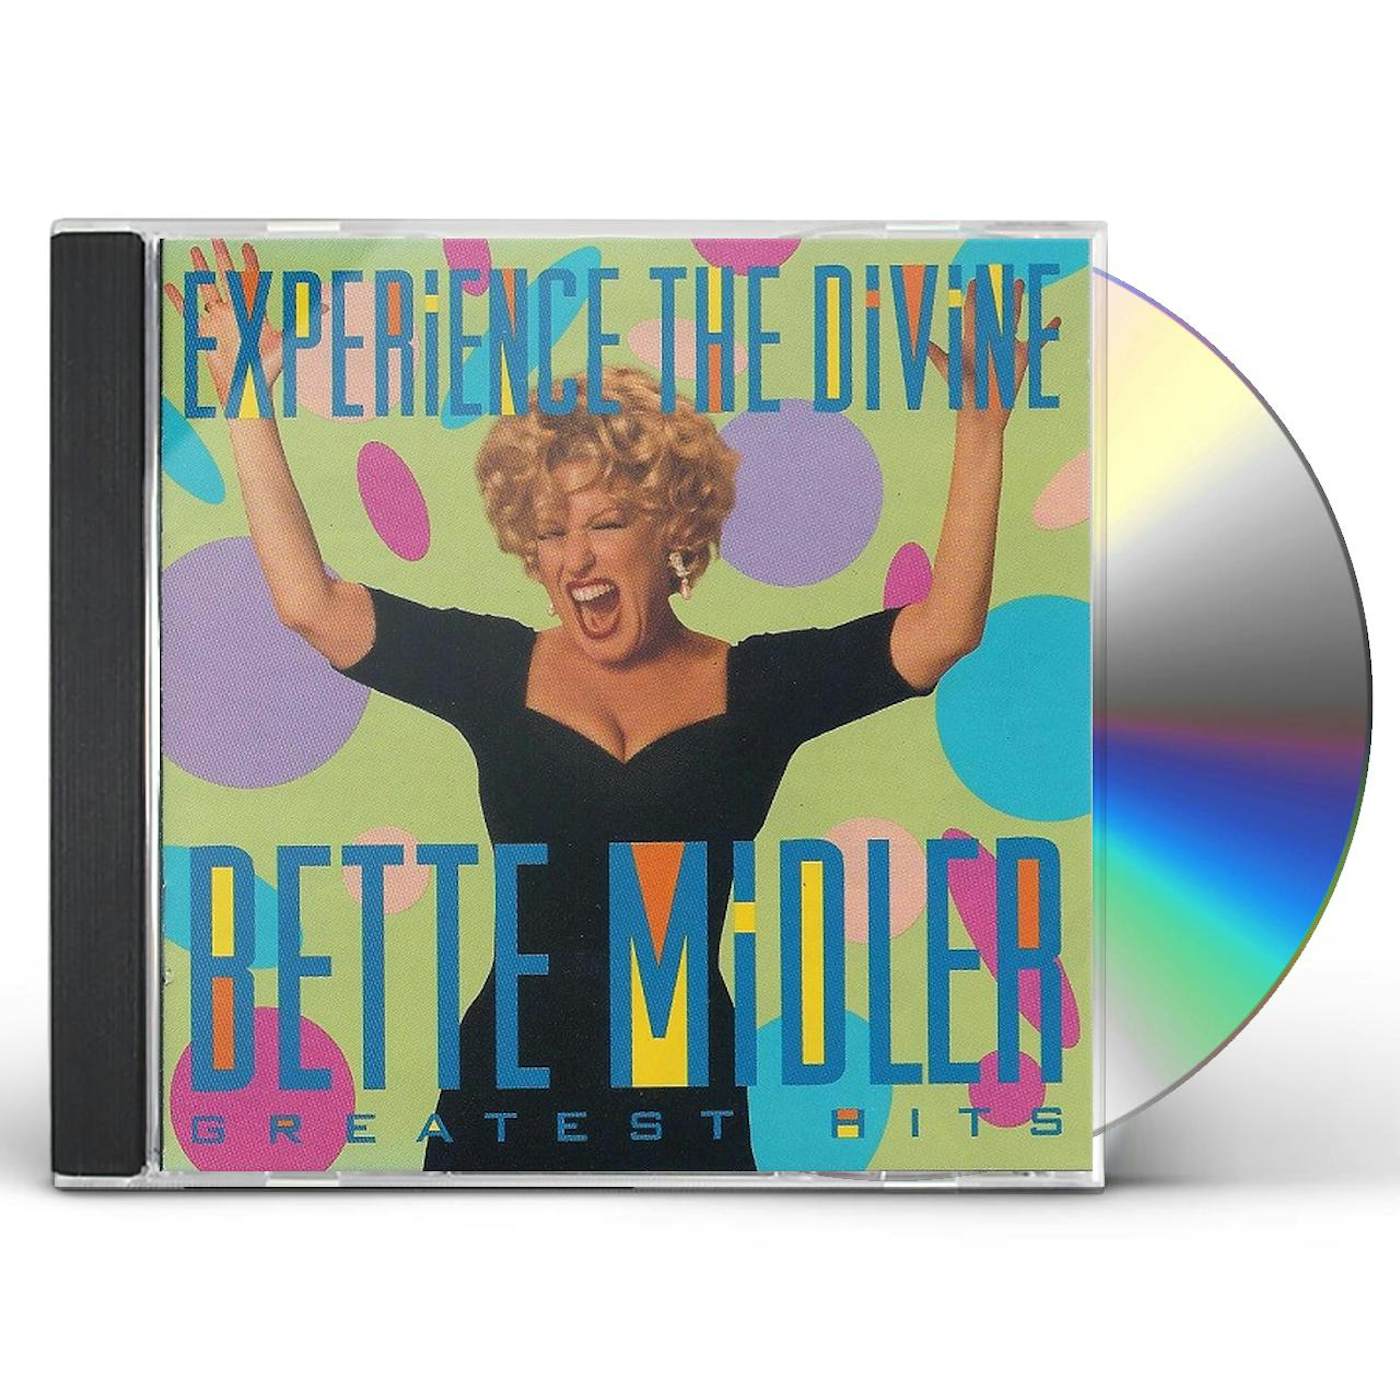 Bette Midler EXPERIENCE THE DIVINE CD